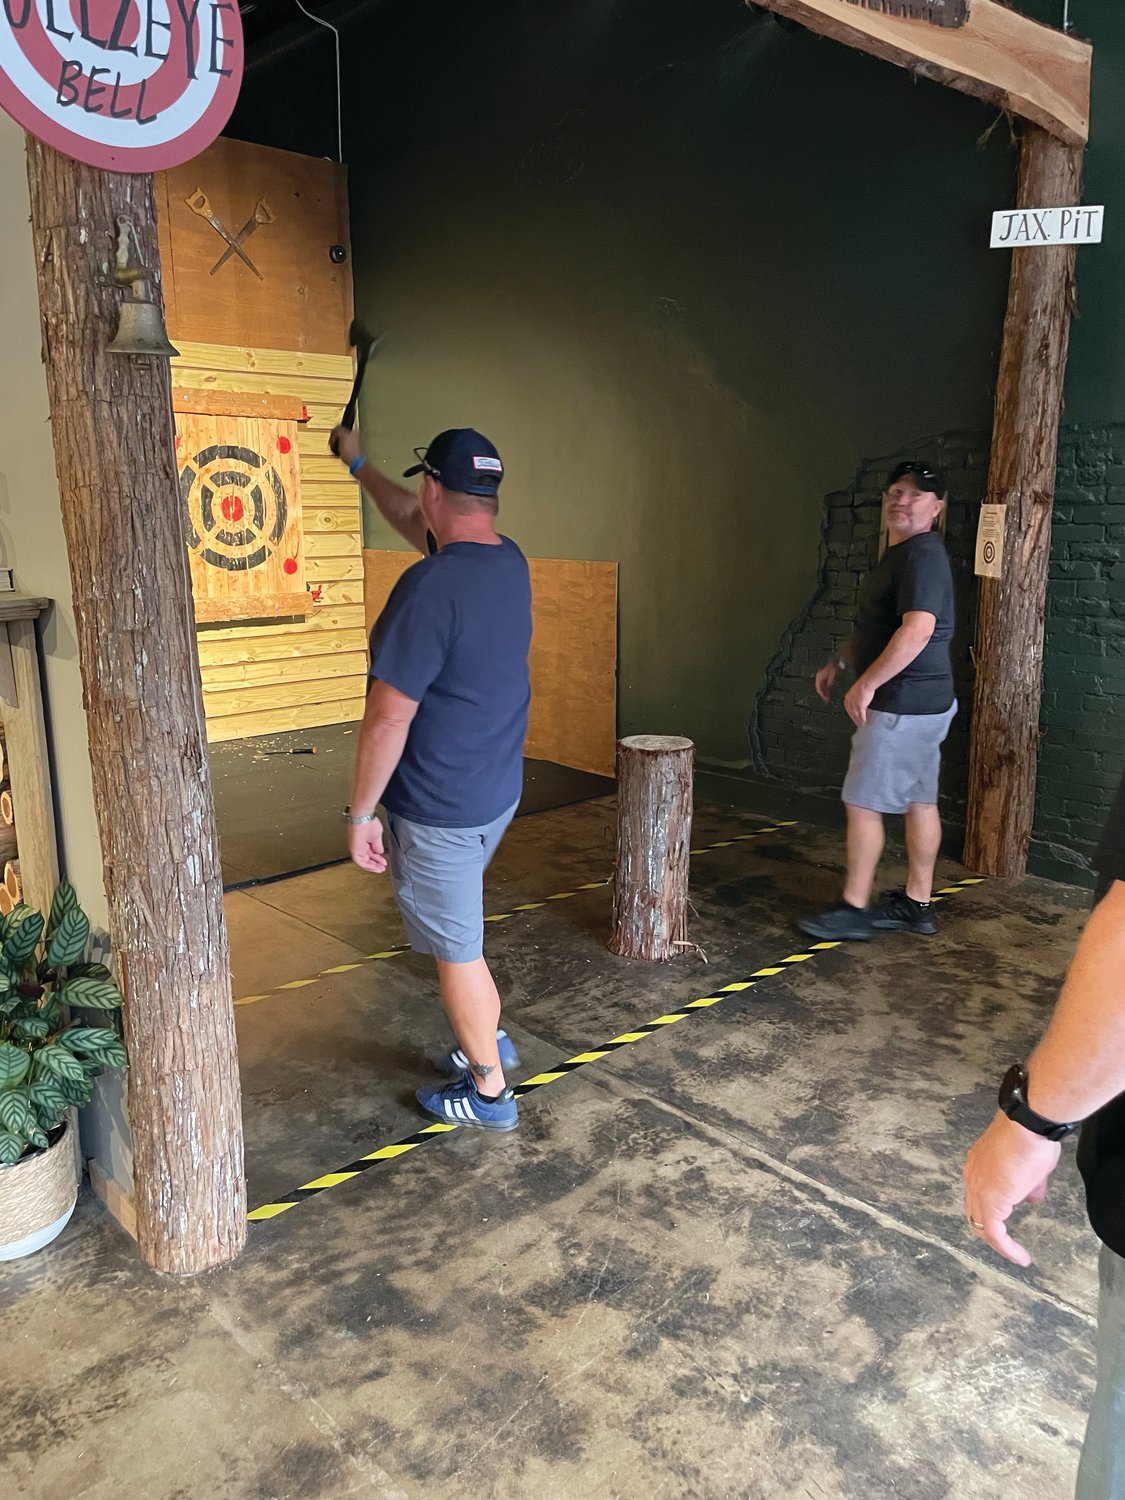 Customers participate in an axe-throwing game. The Jacksonville location has seven throwing pits that can hold up to groups of 10.